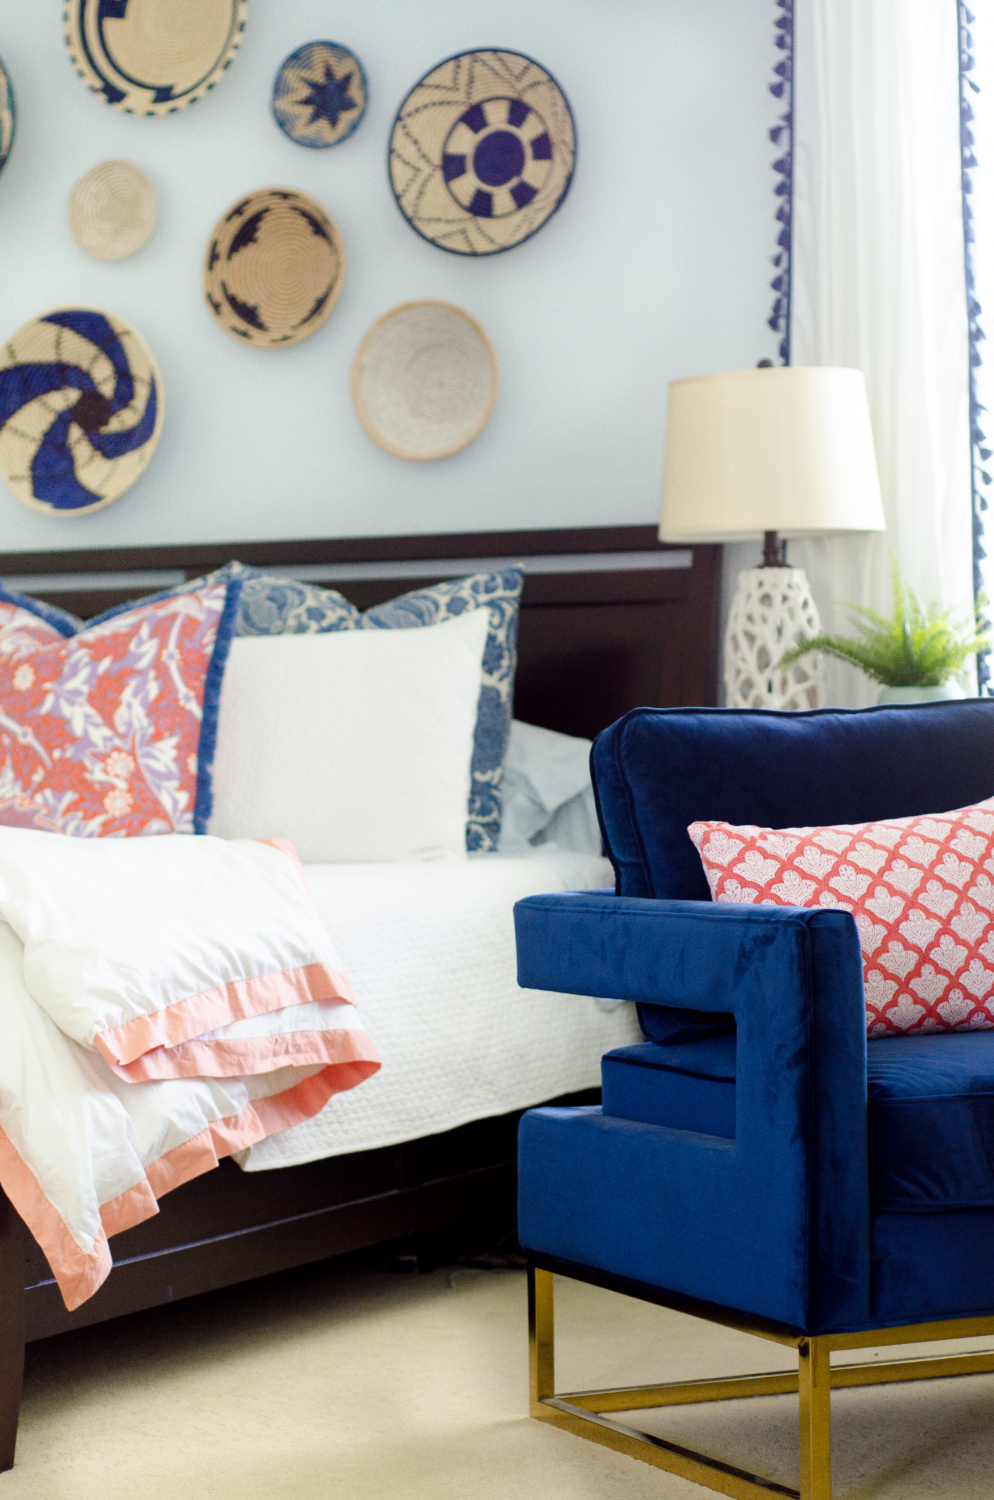 A bright, happy blue and white bedroom with pops of coral and woven basket wall art